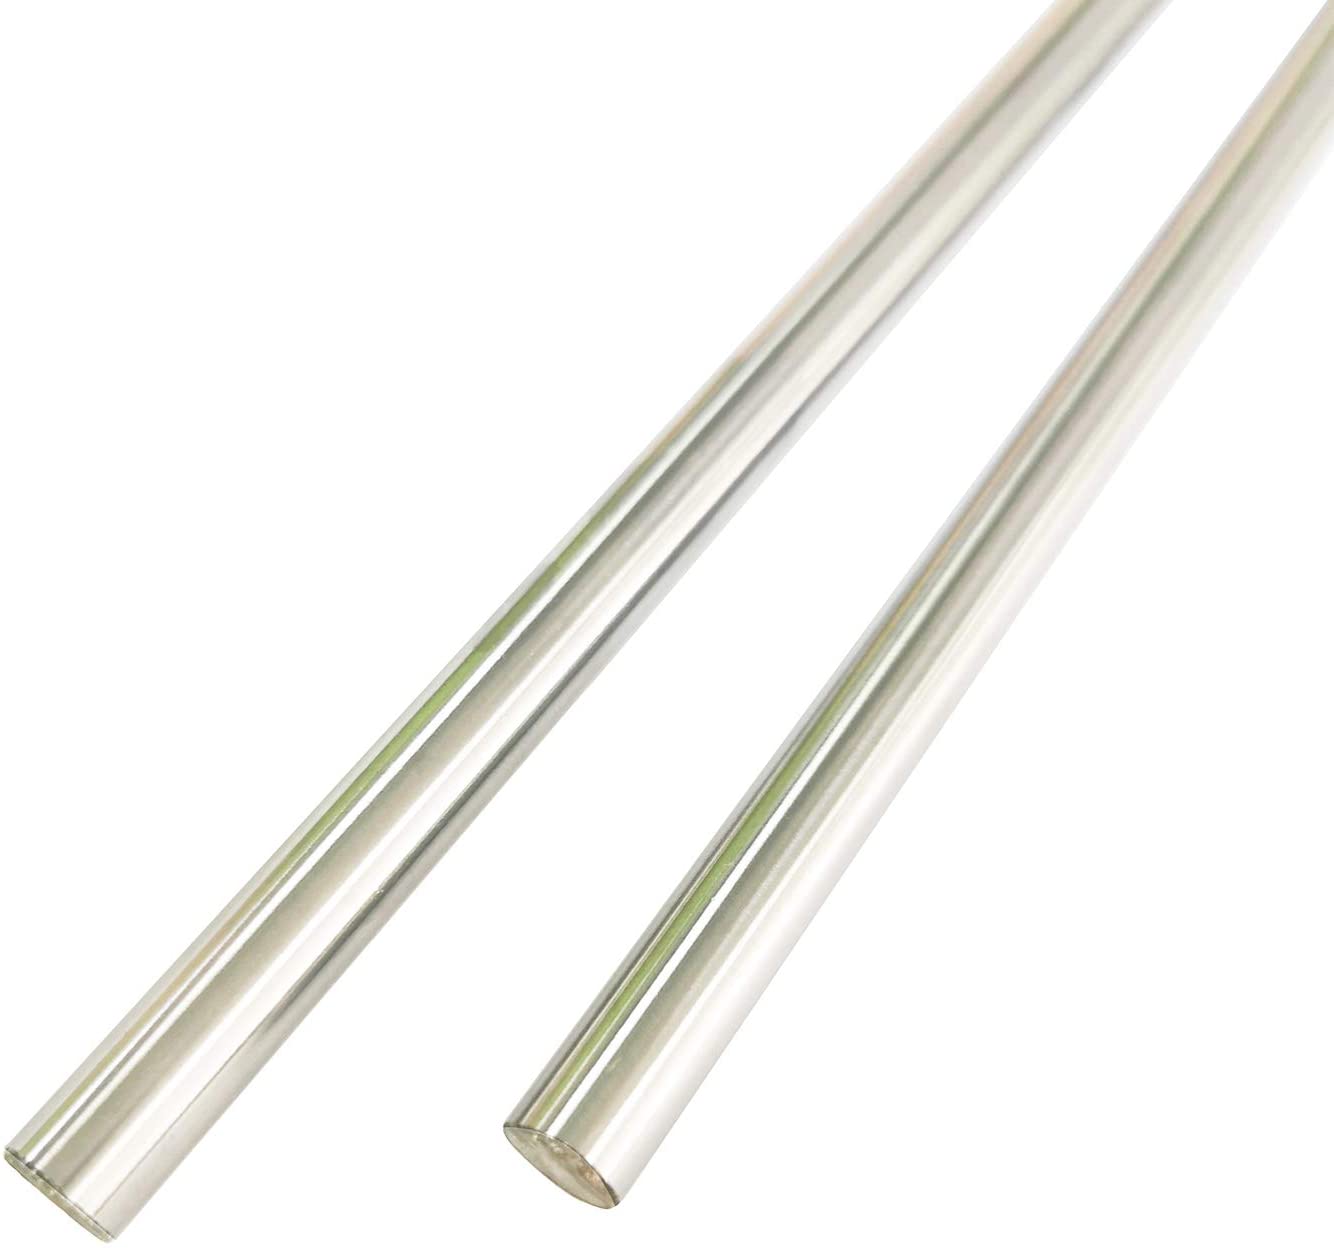 2 pcs of 8x600 linear shaft, size 8mm x 600mm Cylinder Liner Rail Linear Shaft for CNC axis parts